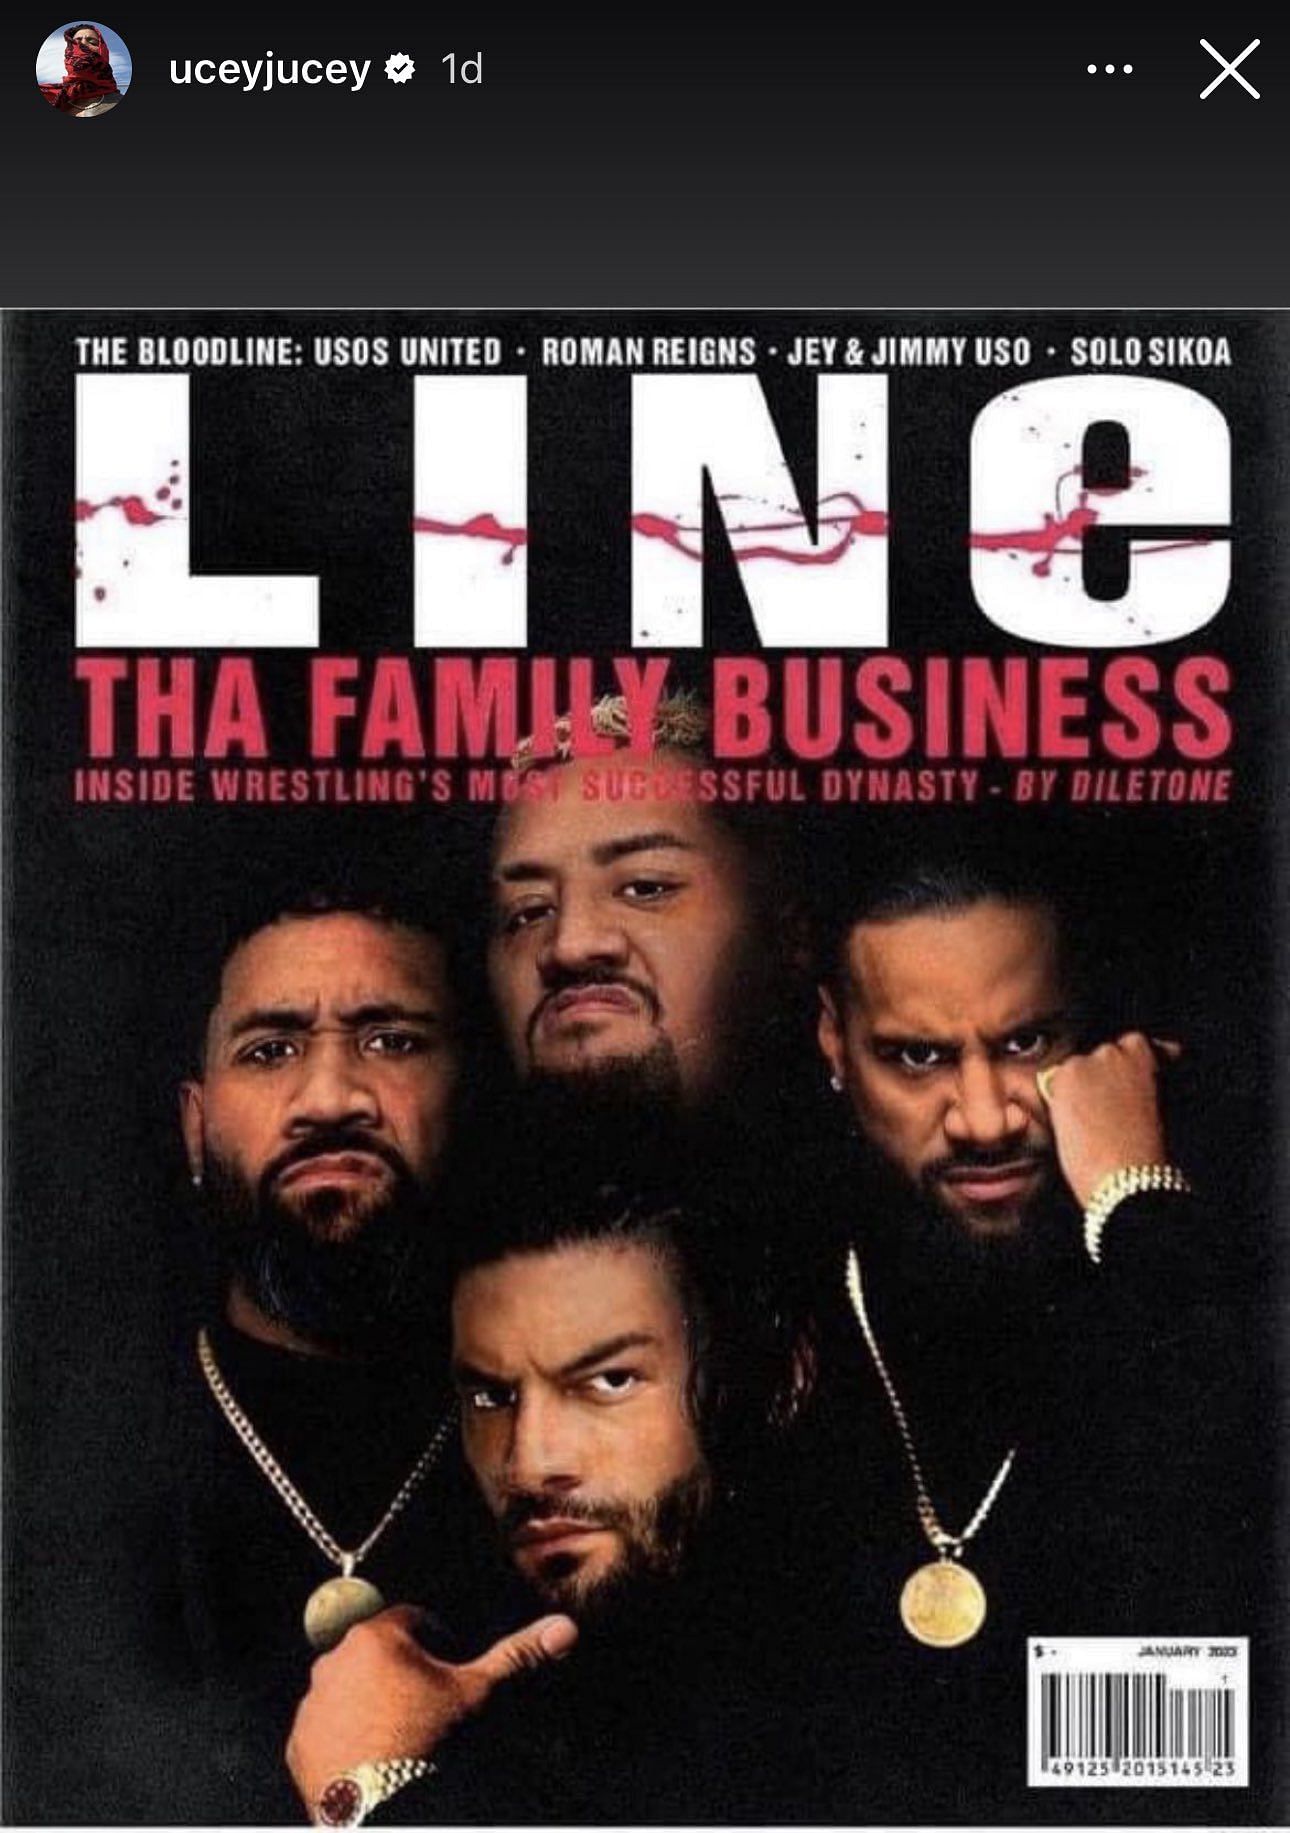 Jey Uso posted an edit of an iconic 90s rap magazine cover, depicting him and the rest of The Bloodline.